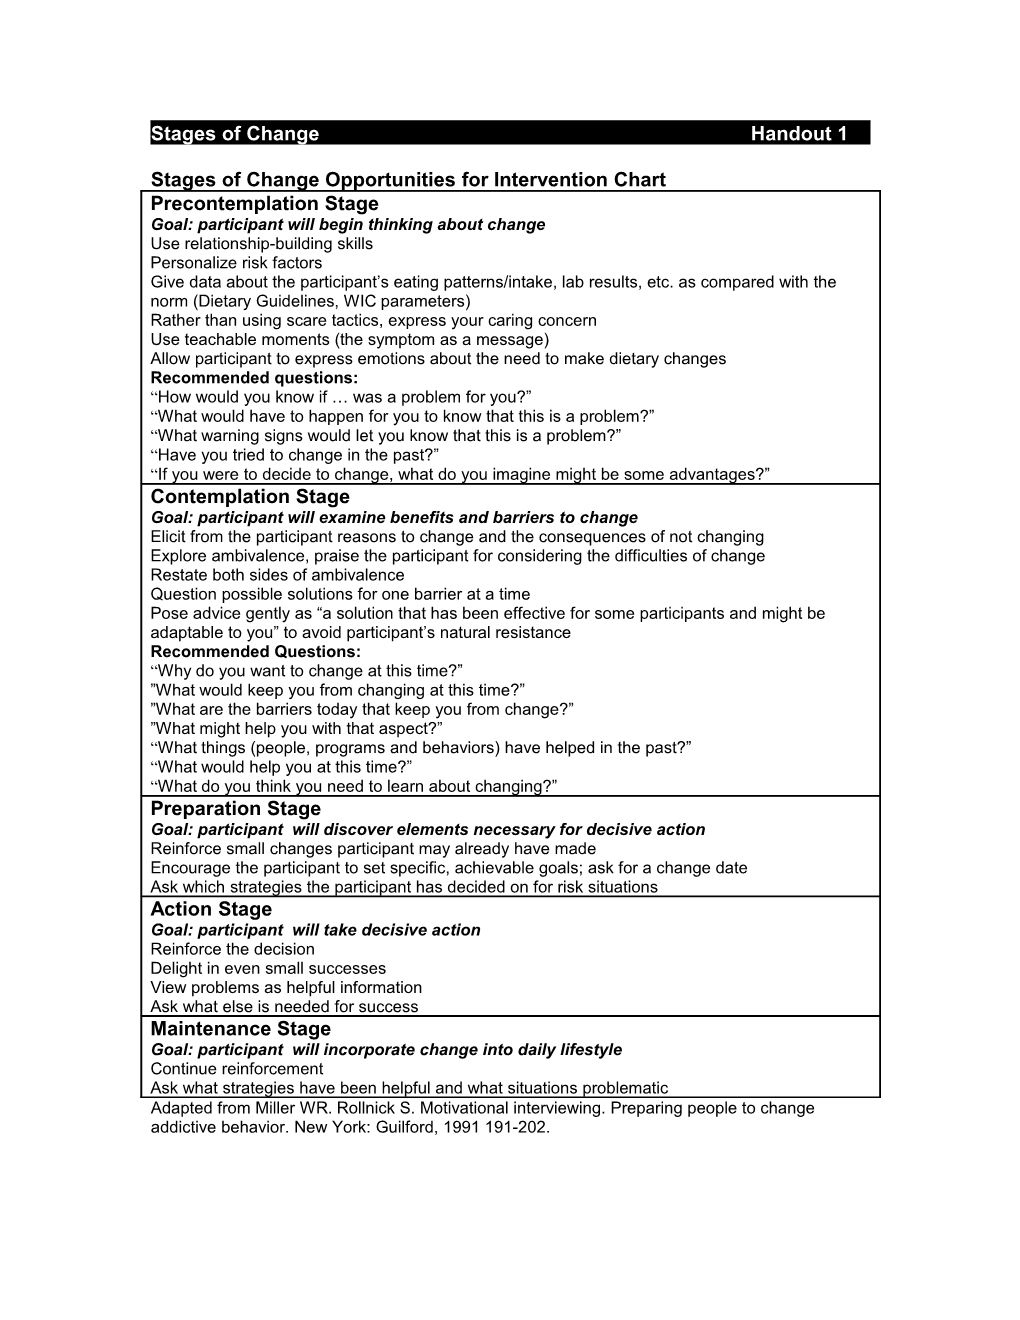 Stages of Change Opportunities for Intervention Chart